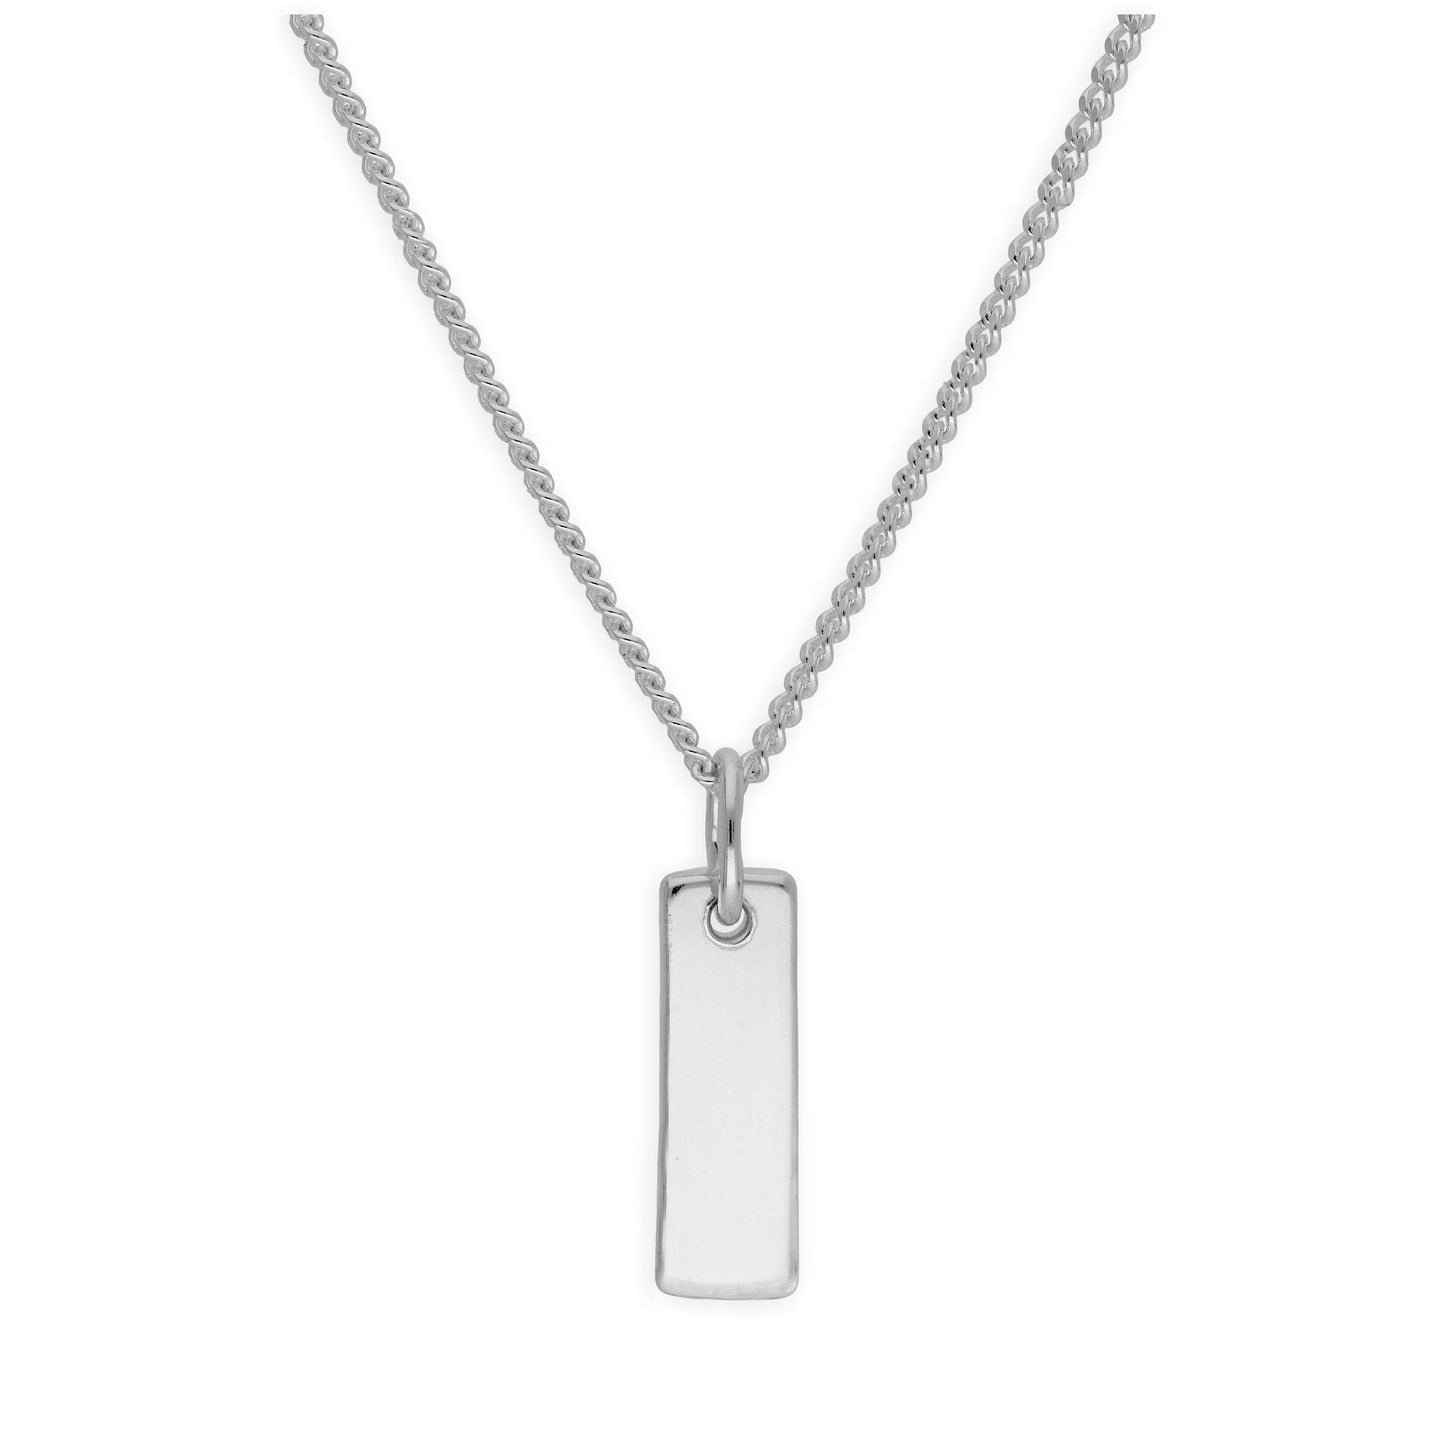 Sterling Silver Mini Bar Engravable Tag Necklace 16-28 Inches